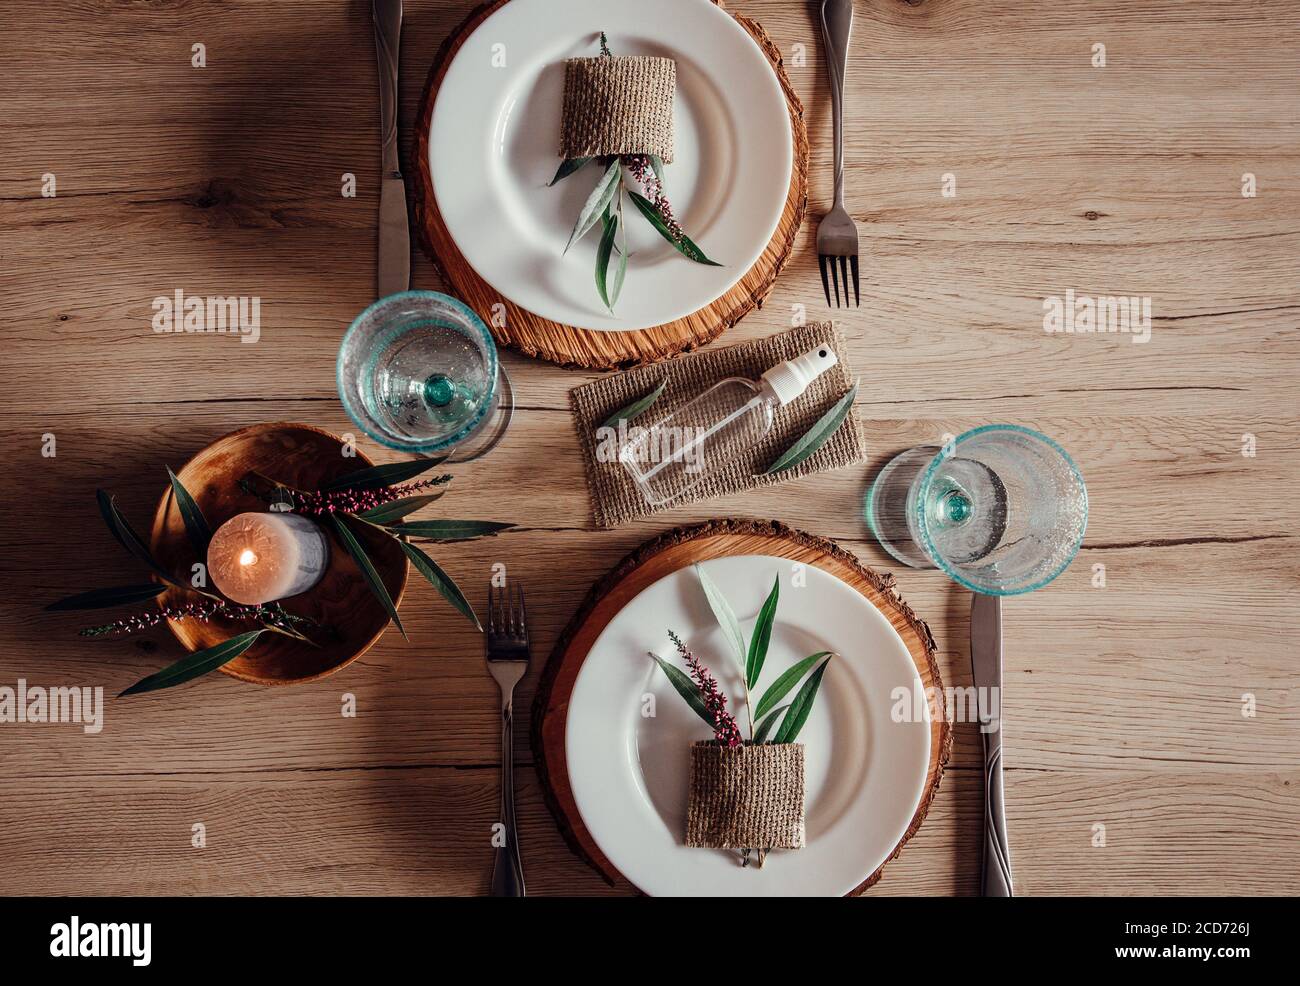 Restaurant table set with hand sanitizer bottle in center. White plates with leaf and heather flower decoration.Virus spreading prevention. Stock Photo